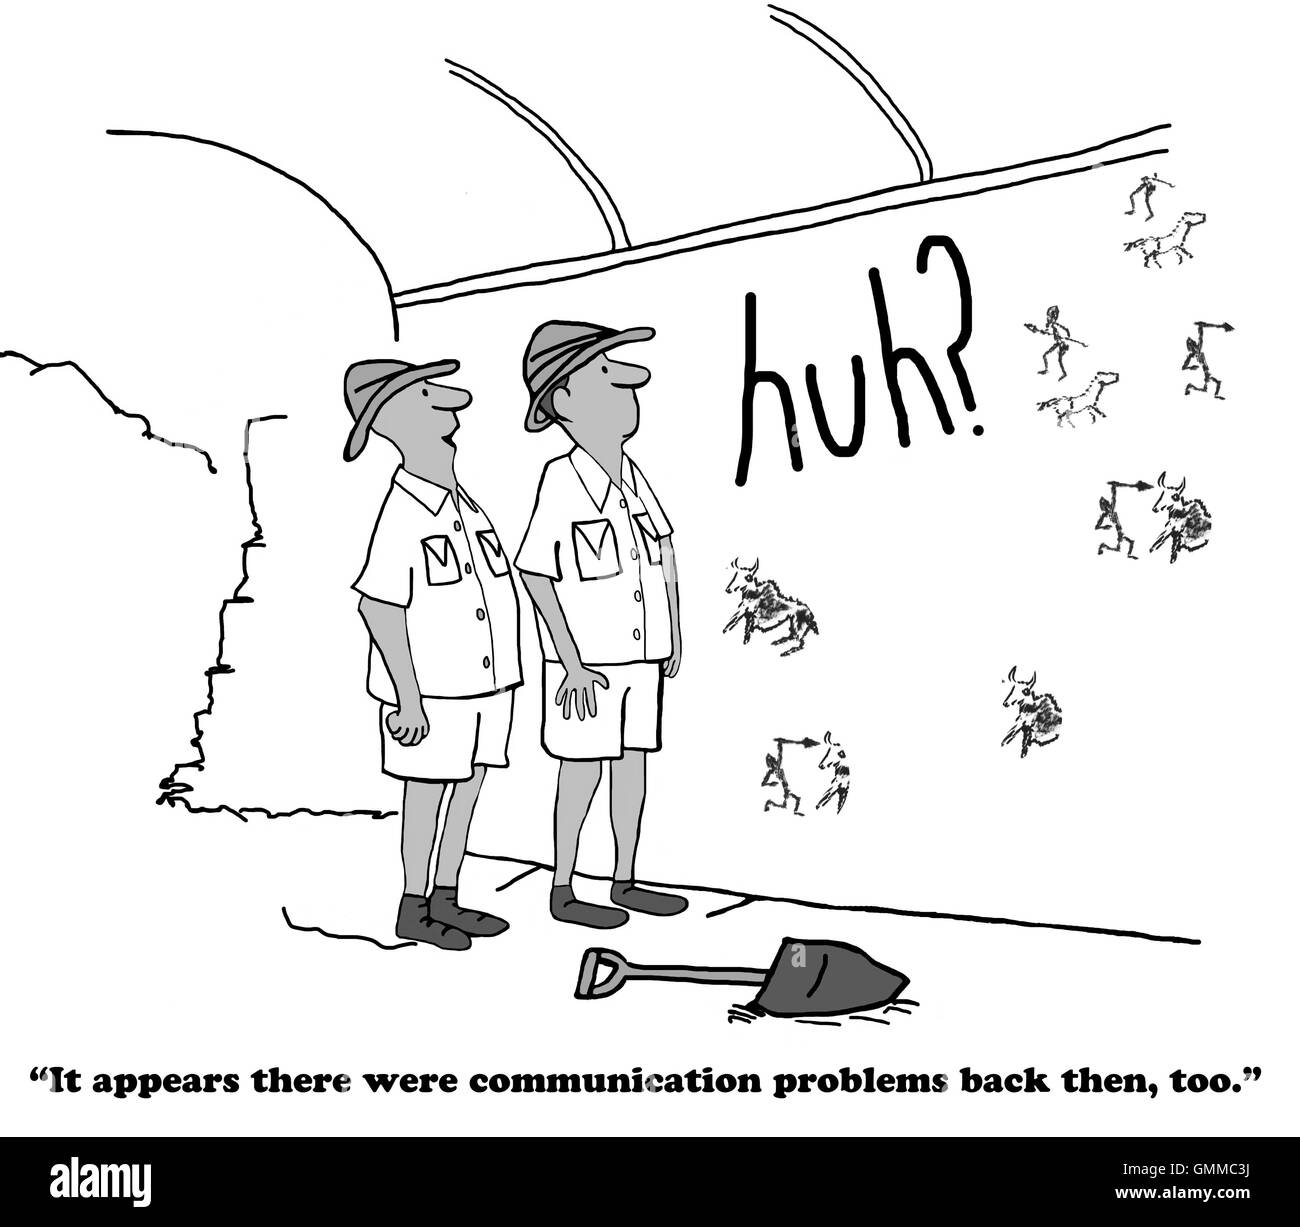 Business cartoon showing the word 'huh' among cave drawings. Stock Photo